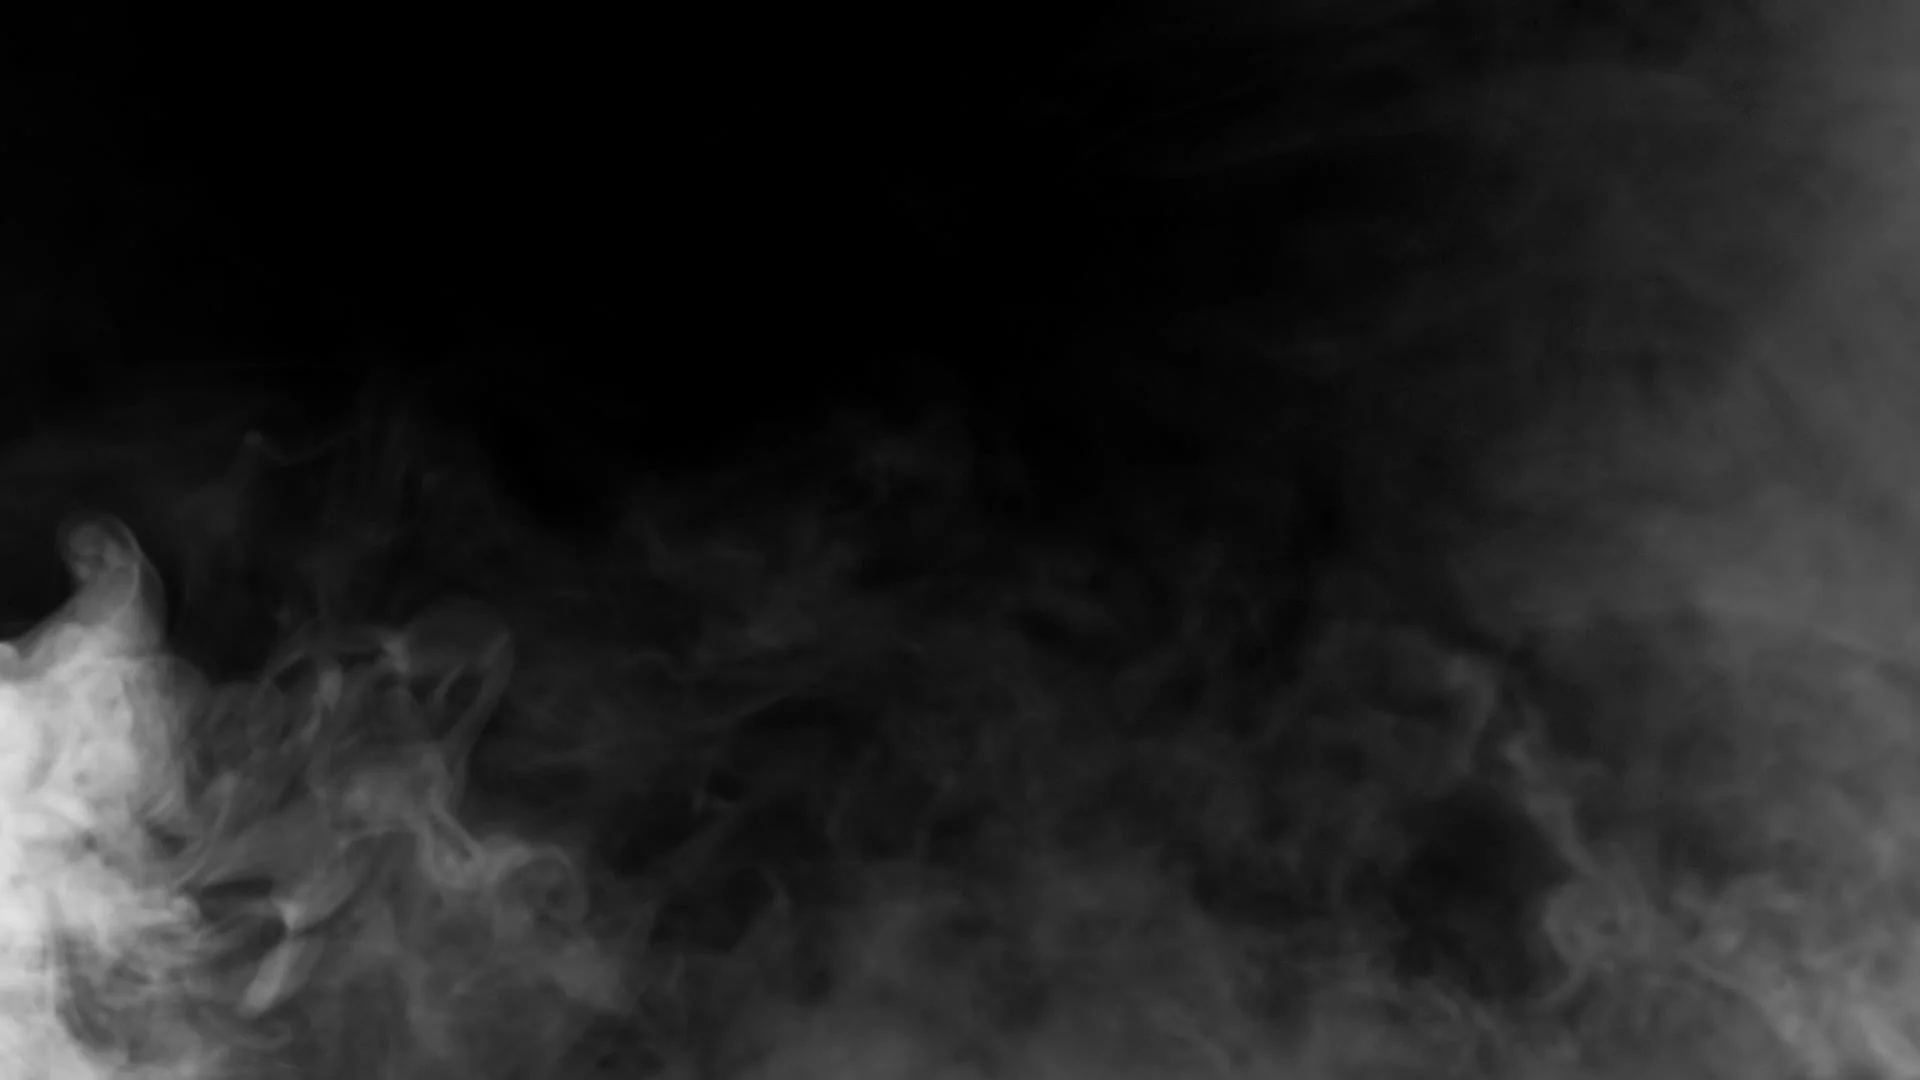 772009 White Smoke On Black Background Images Stock Photos  Vectors   Shutterstock